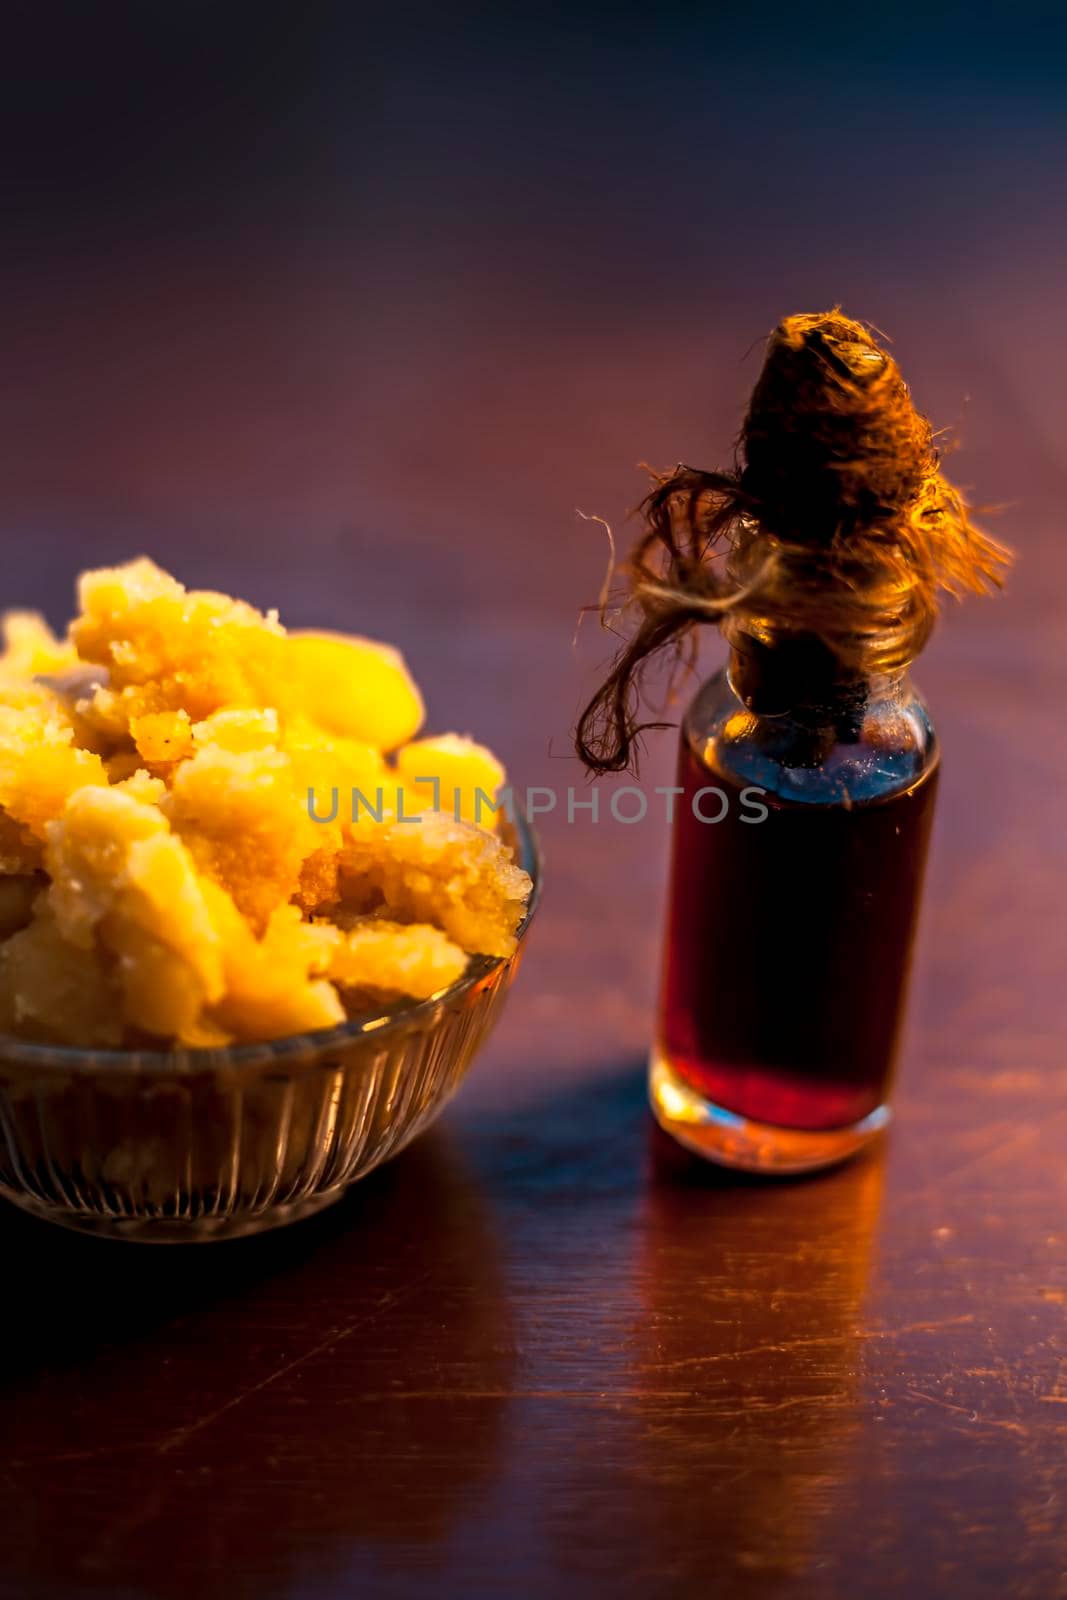 Close up of glass cup full of raw jaggery or gud or palm jaggery and its extracted oil in a glass bottle used for oil pulling in ayurvedic dental treatment. Vertical shot.